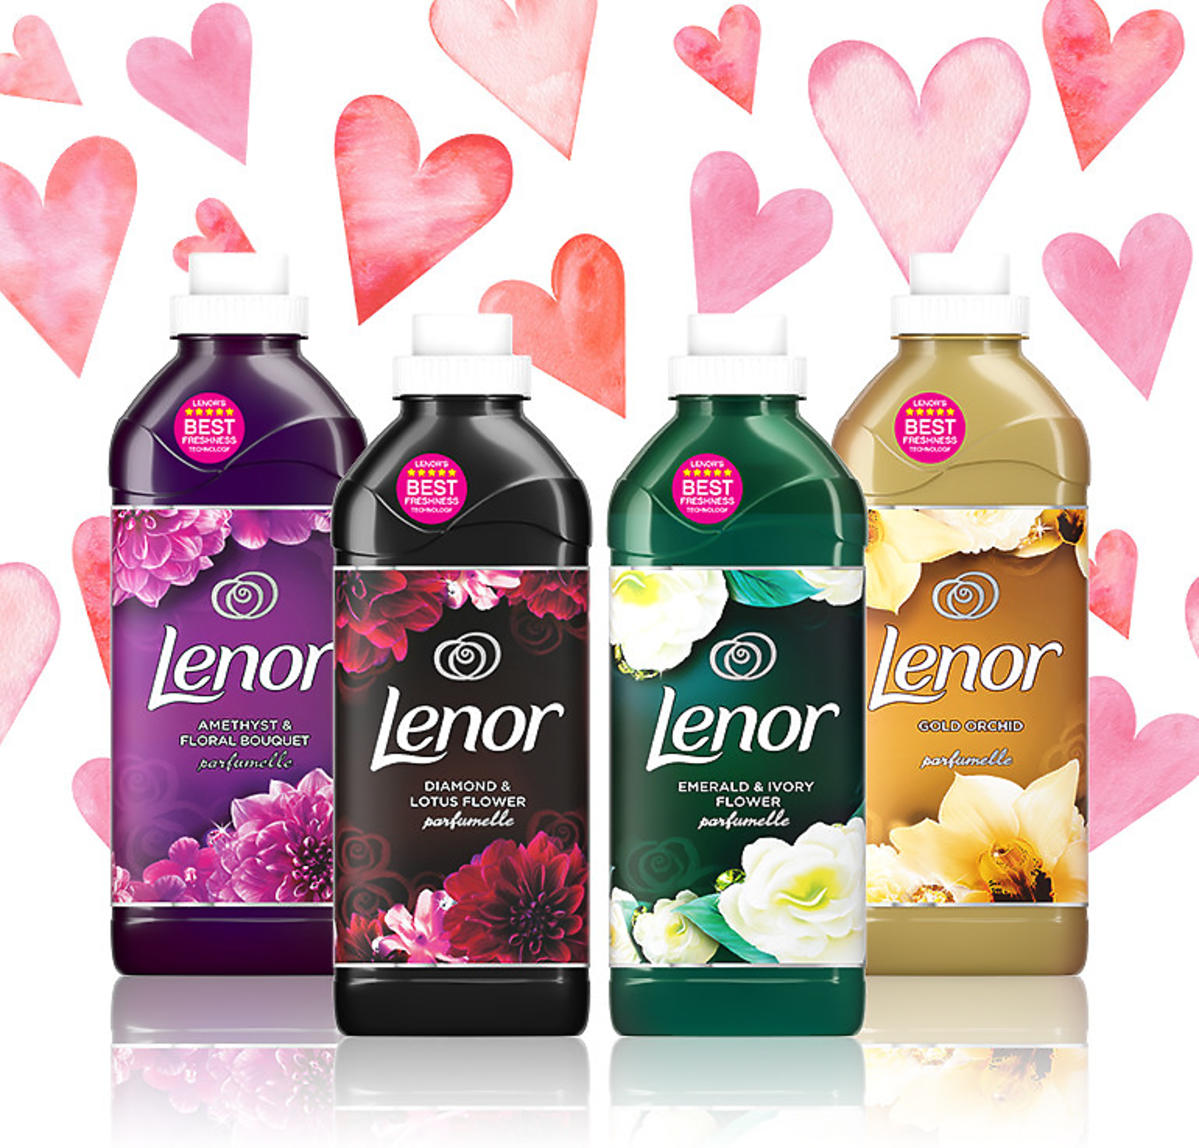 lenor_party